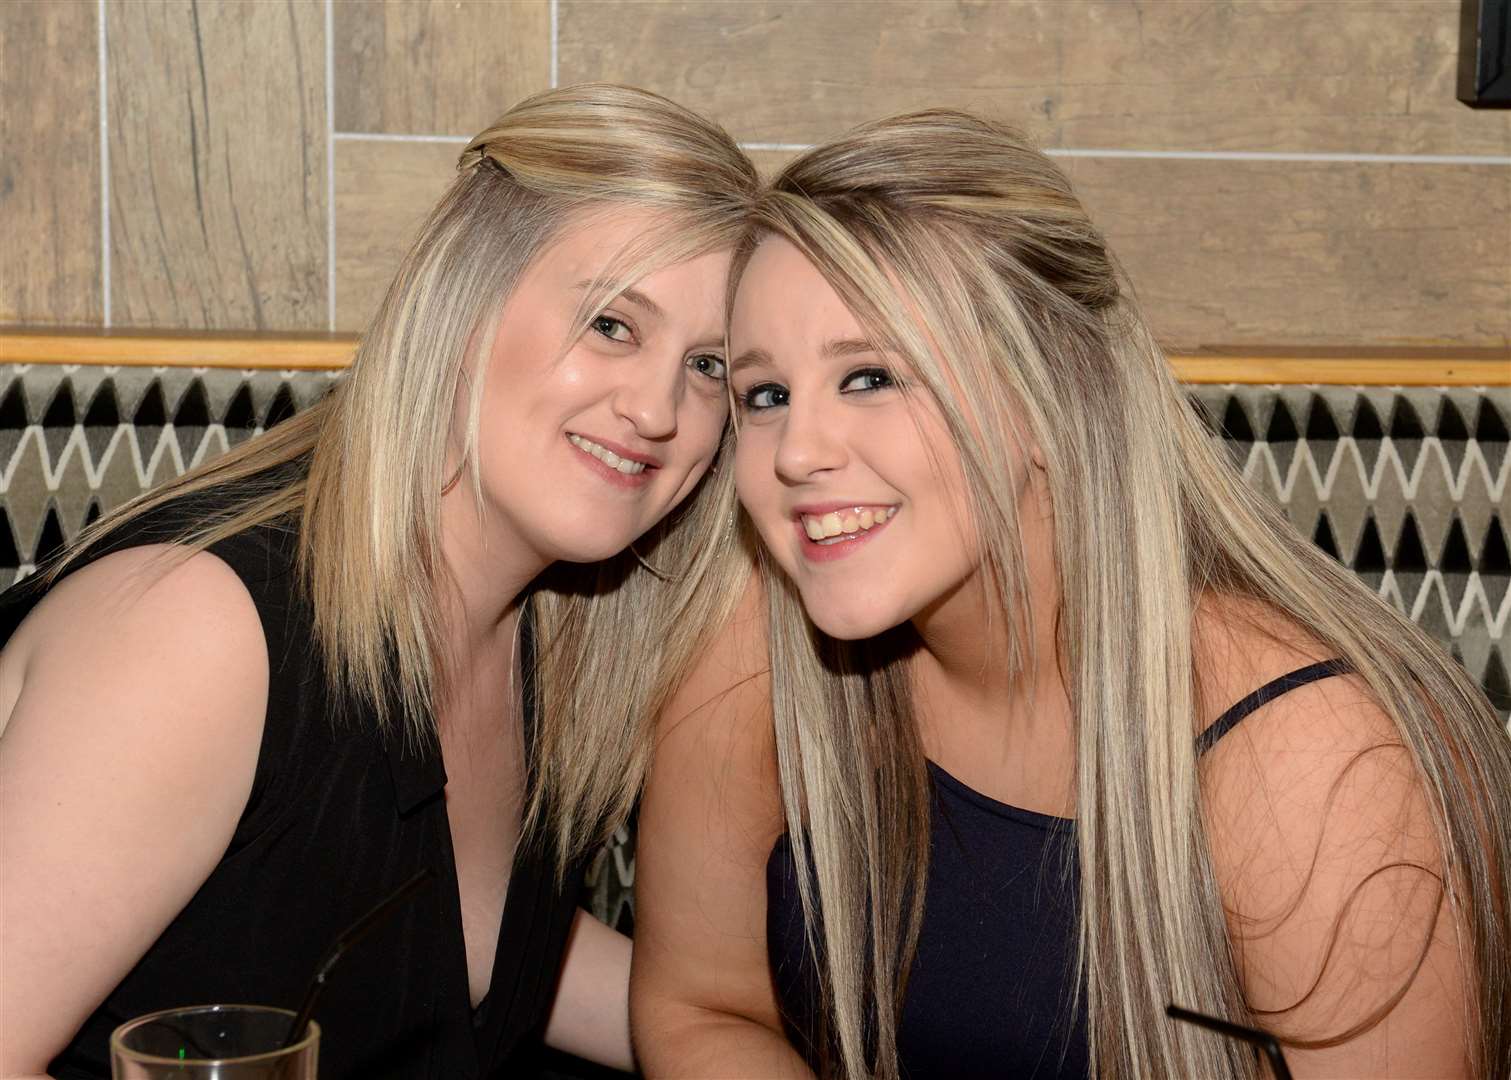 Sisters Donna and Danielle MacIver